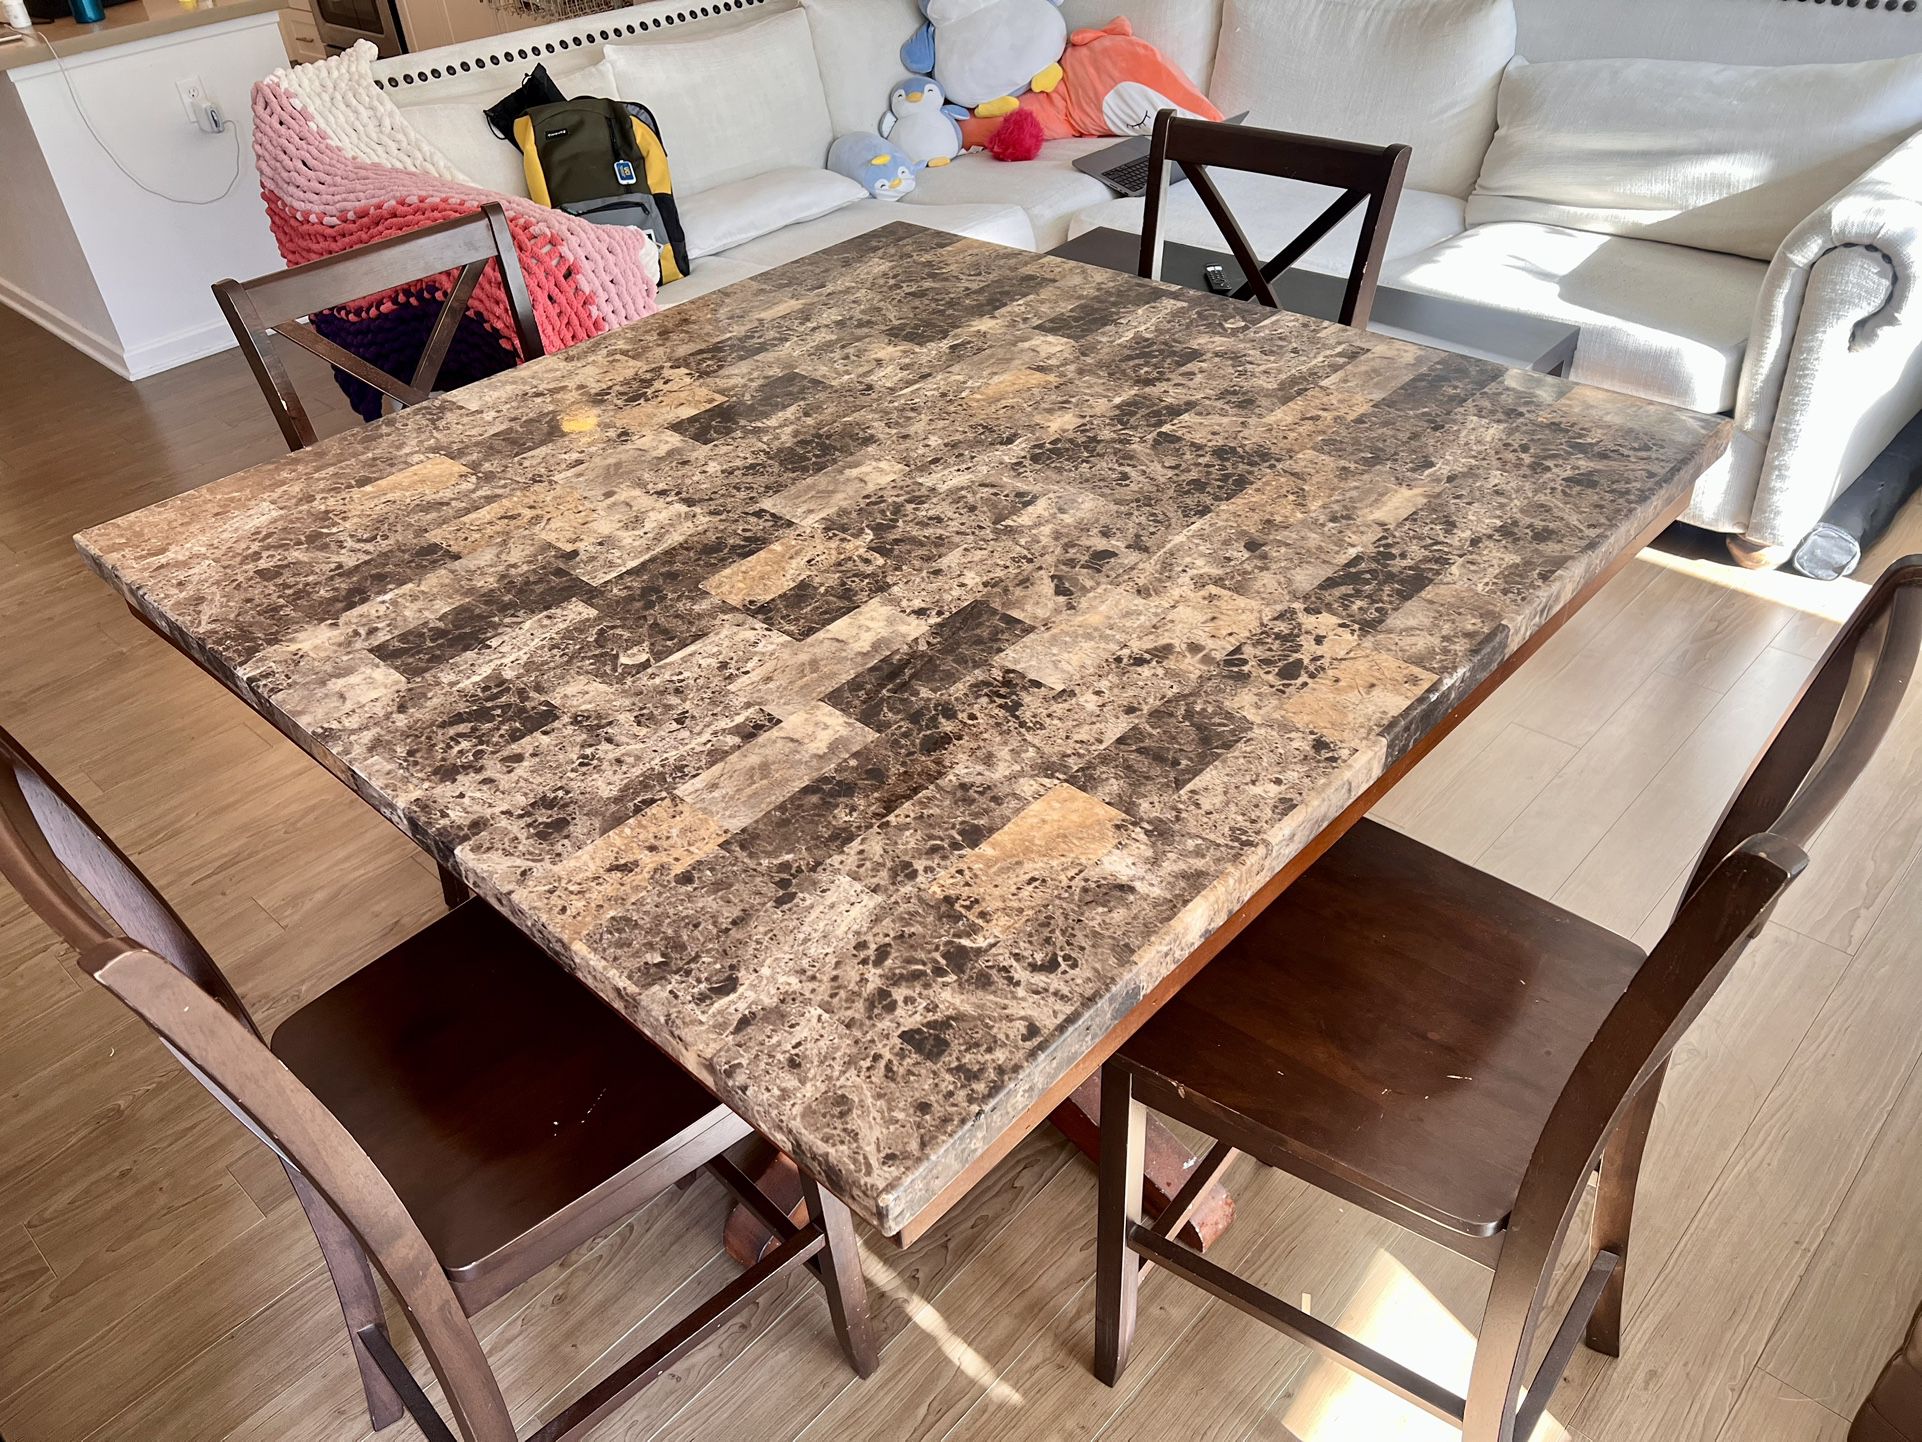 Marble bar Dining table with chairs